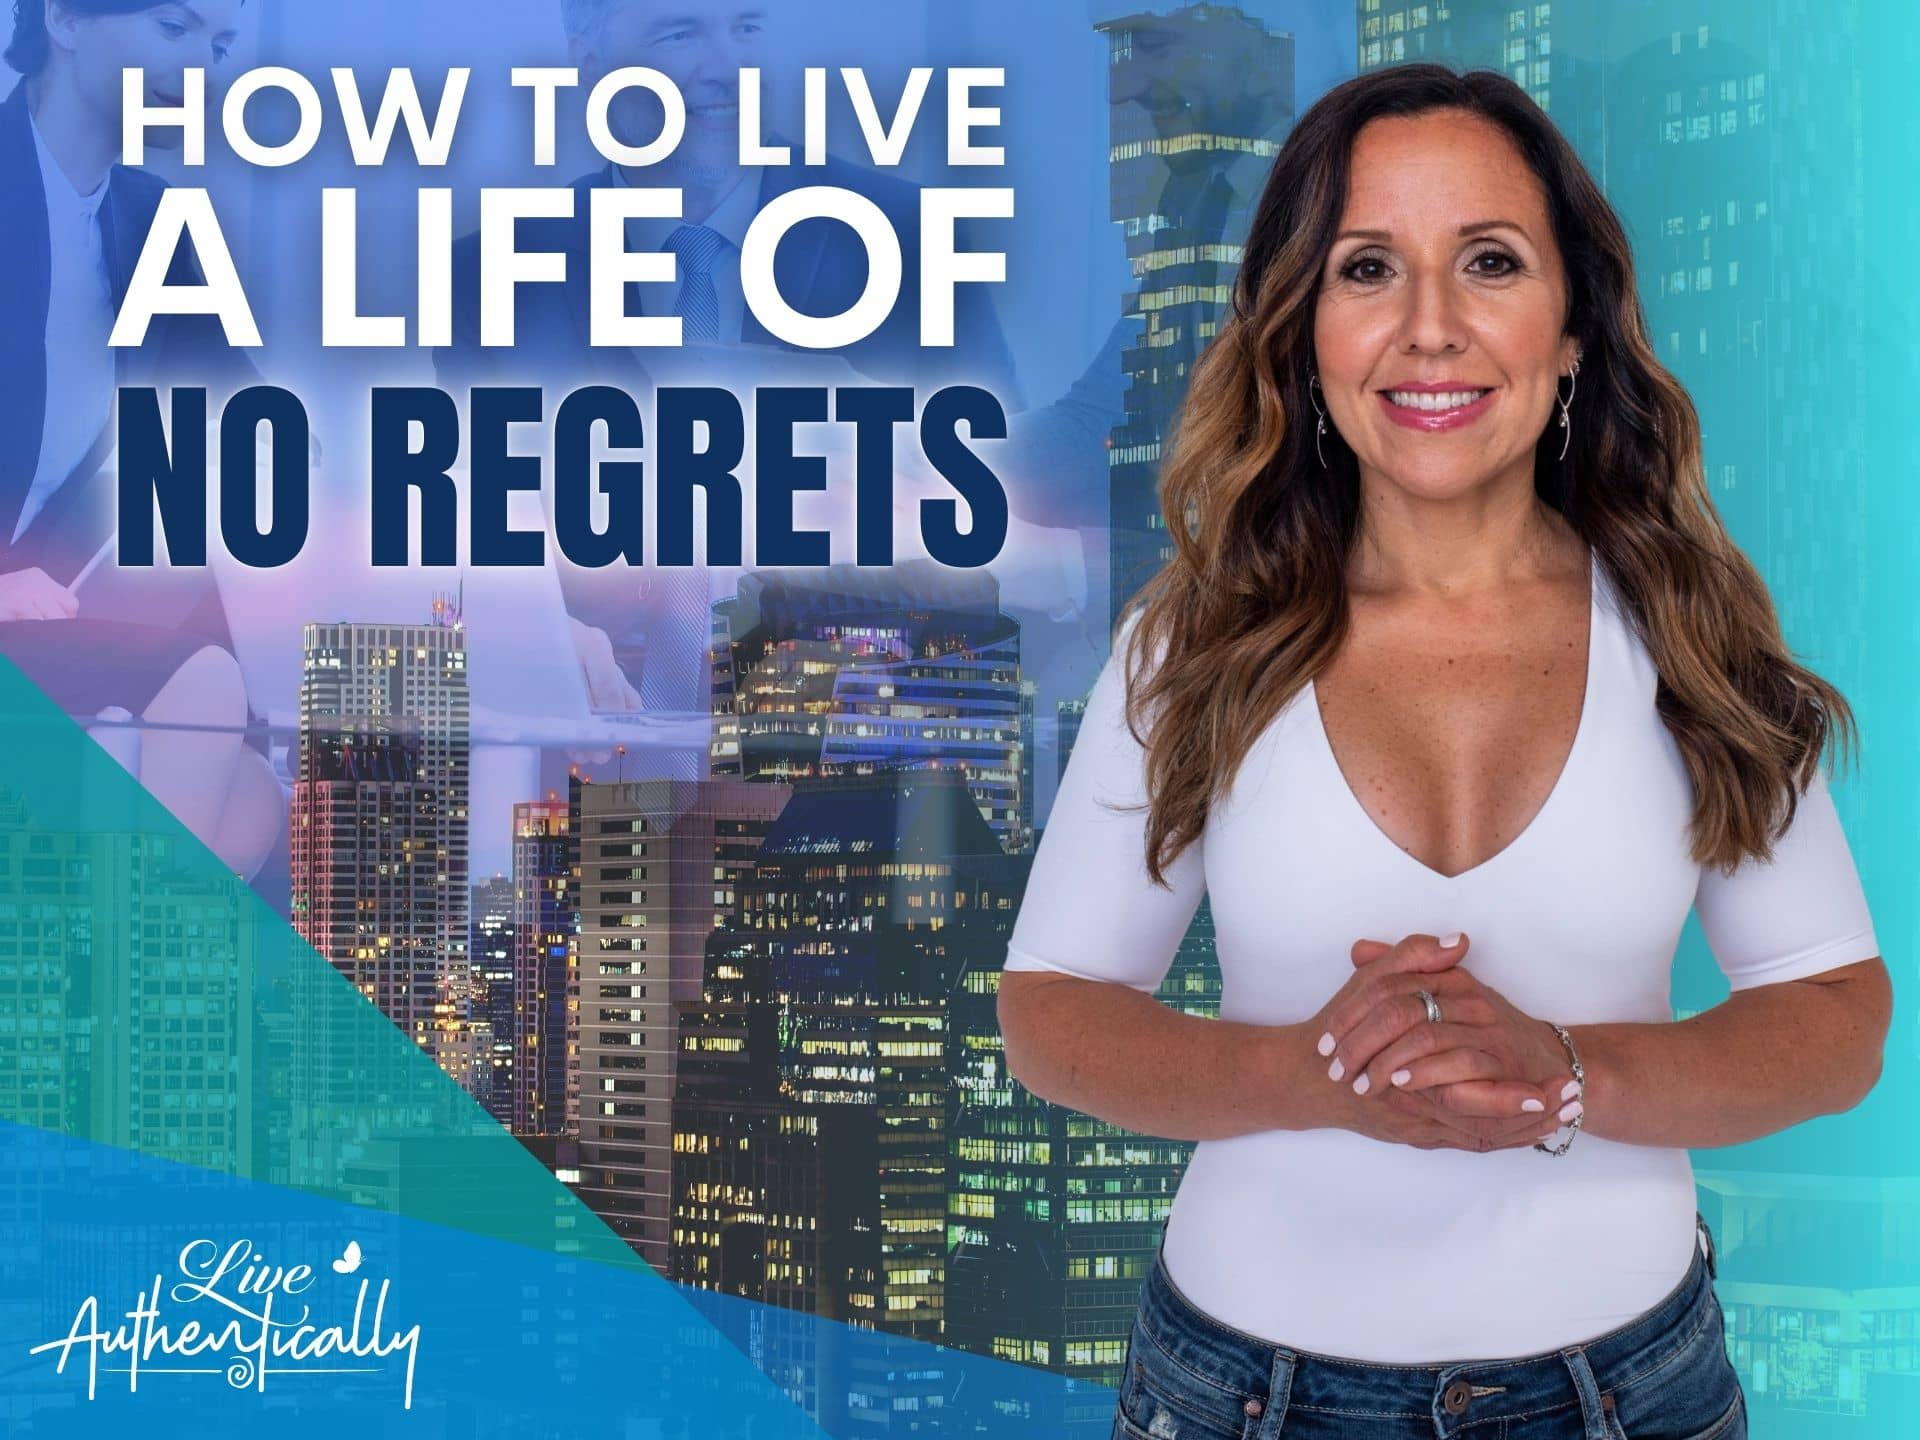 How to Live a Life of No Regrets